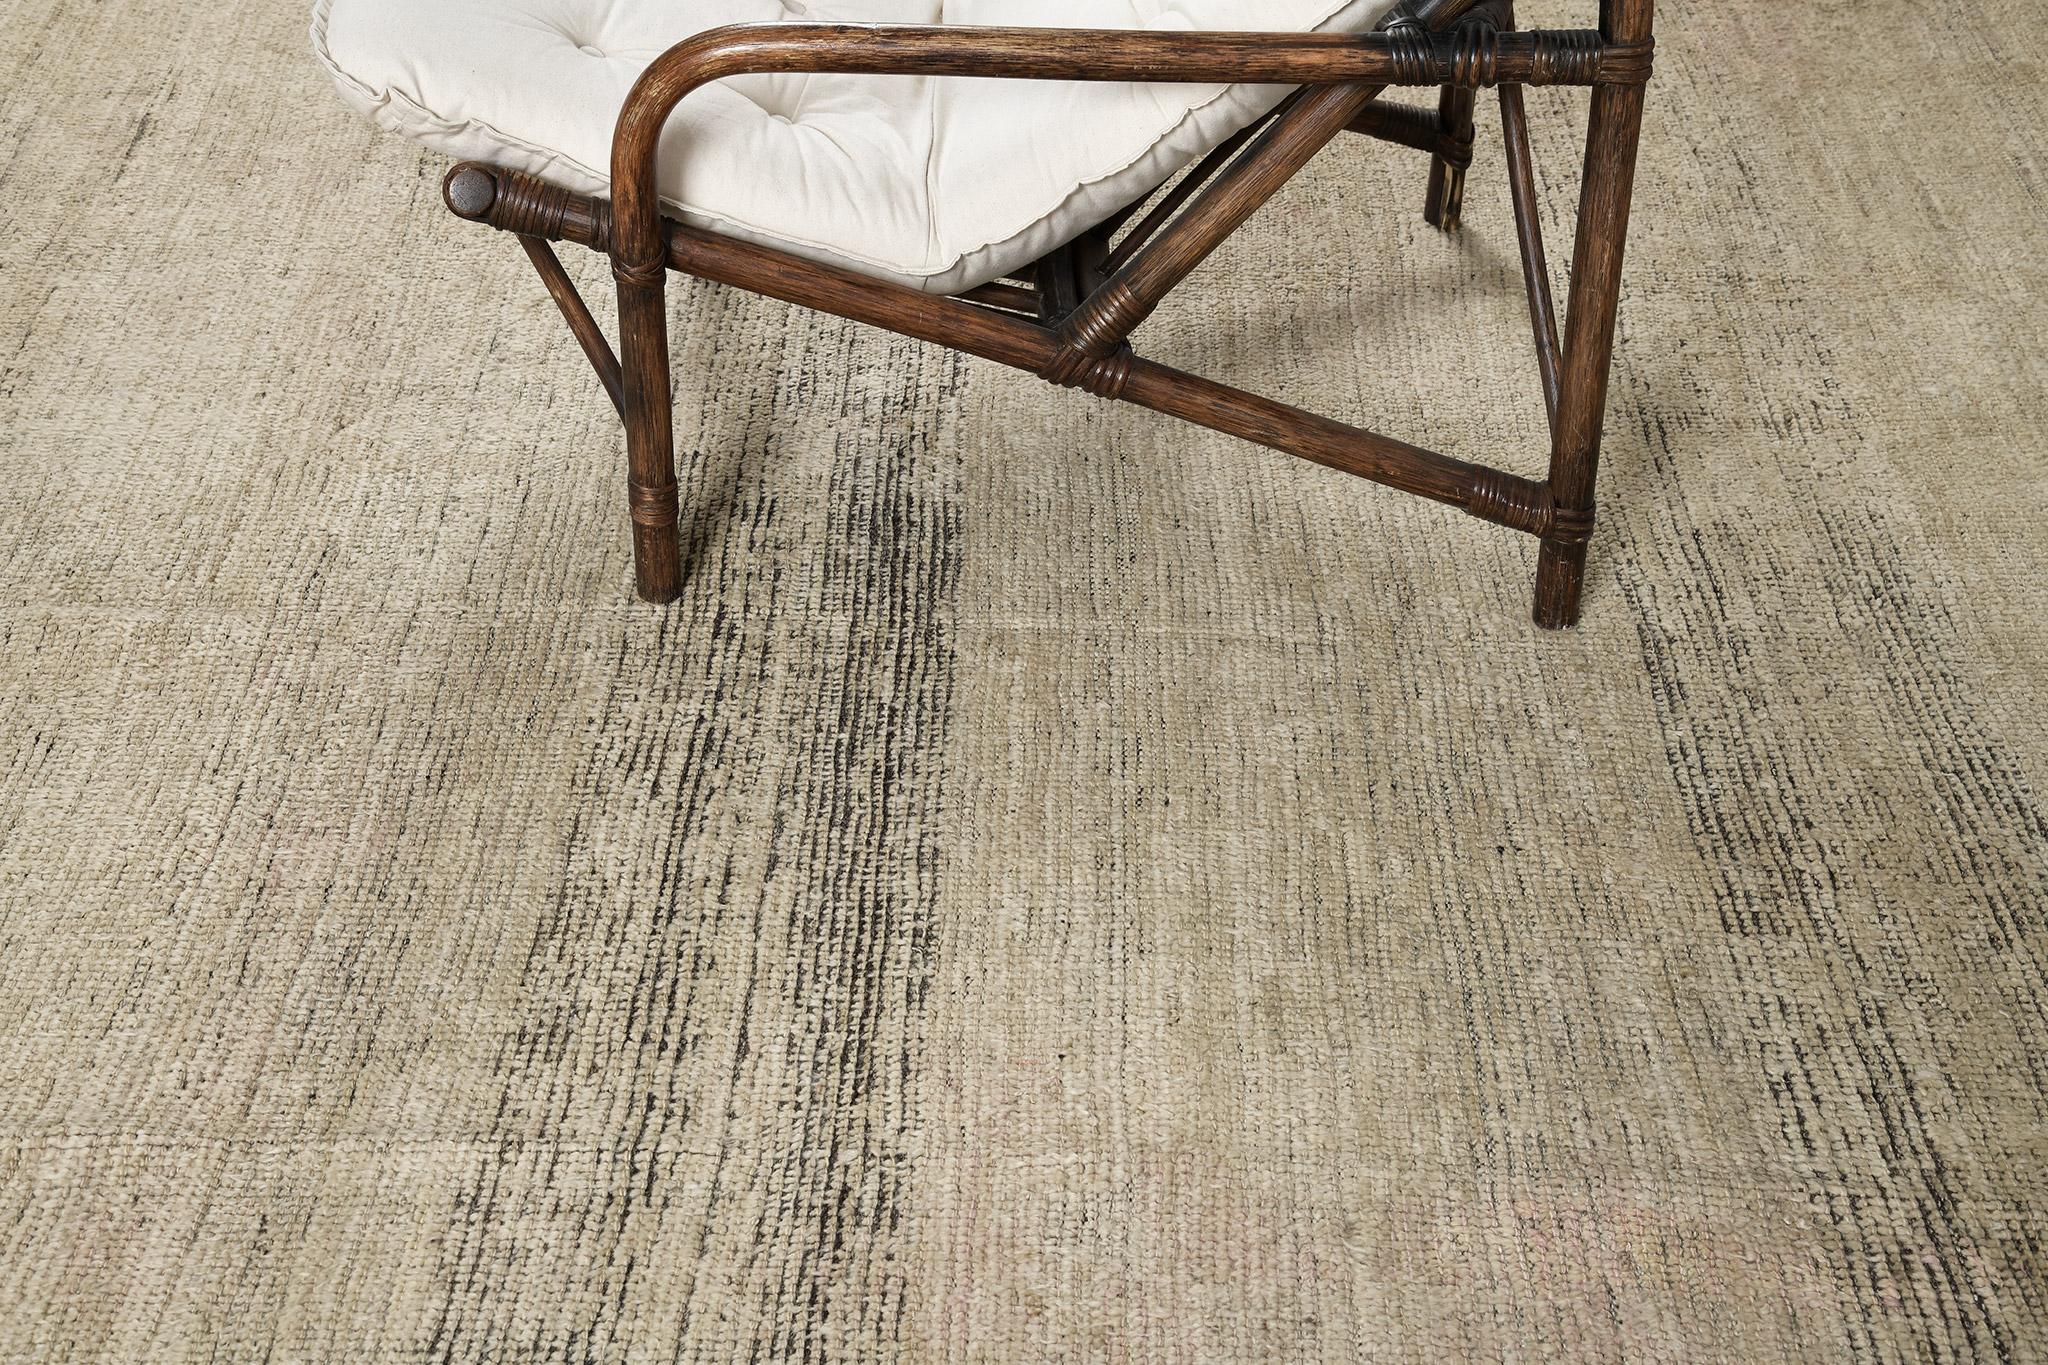 A magnificent display of work of art, Wadu’ features a natural colour scheme of sand and hints of charcoal. Visible abrash magnifies the rug's character and leaves an impression that surely a viewer cannot resist. A piece that is a perfect addition